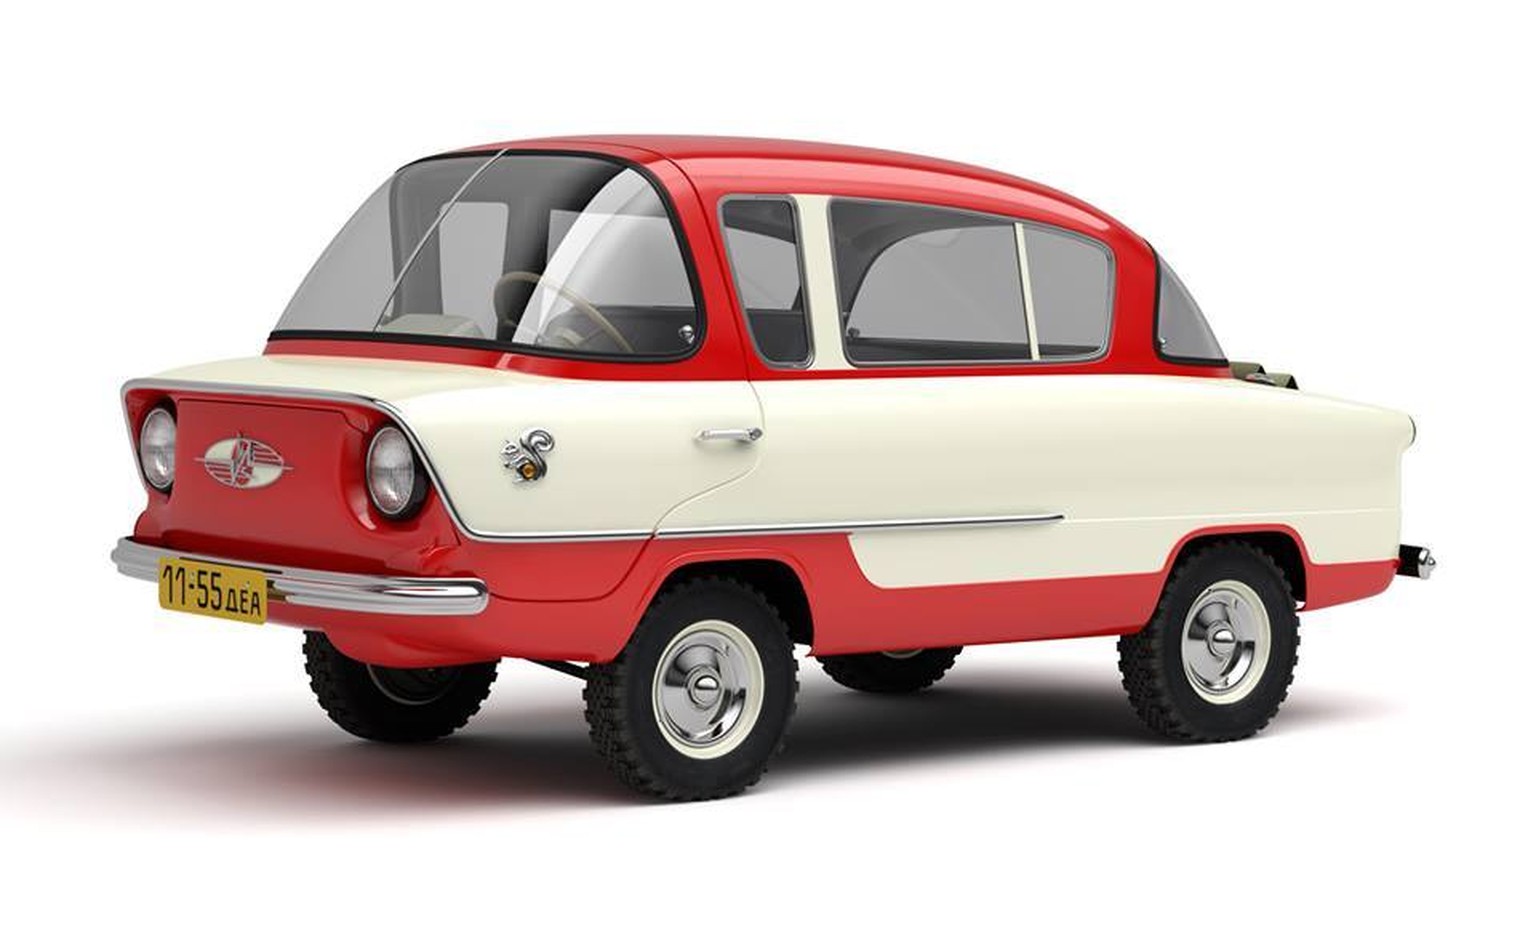 http://www.rumcars.org/forum/index.php?topic=4200.0 nami a50 belka